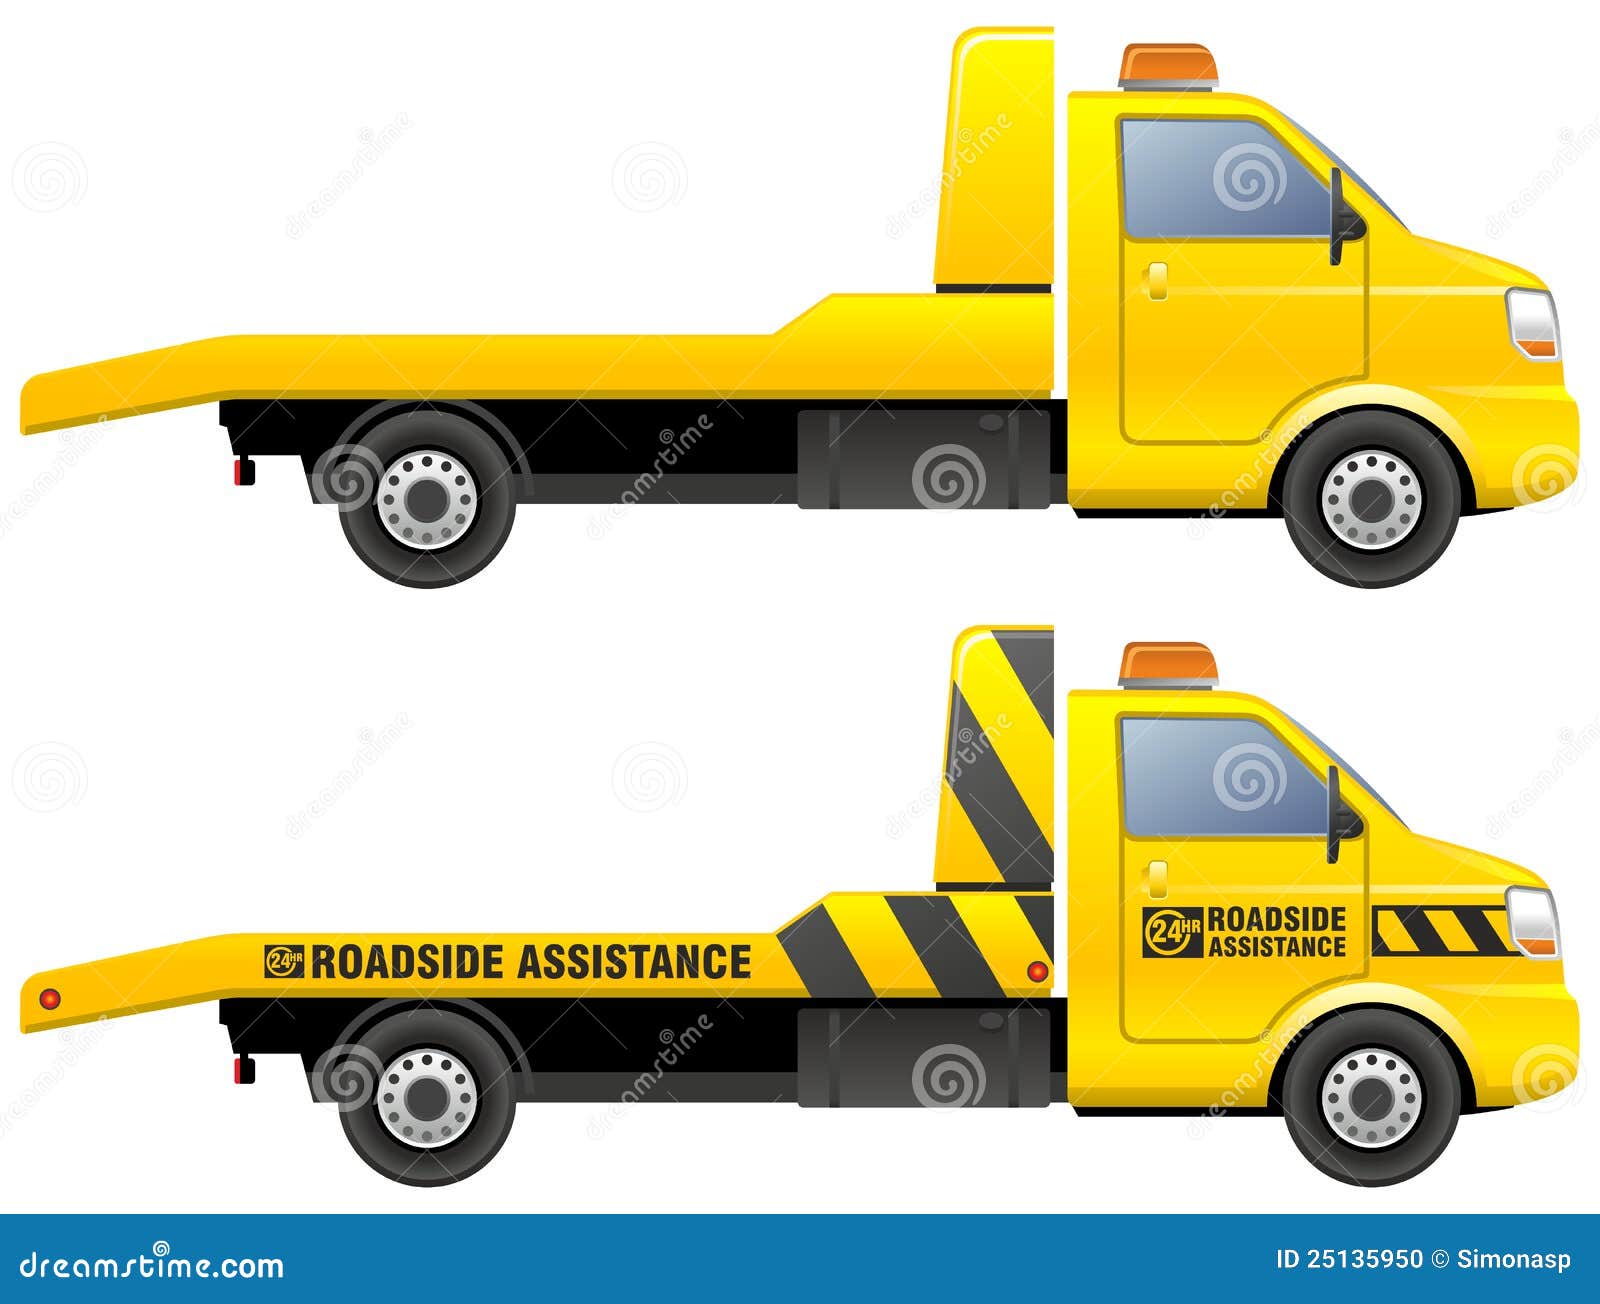 Tow truck company business plan